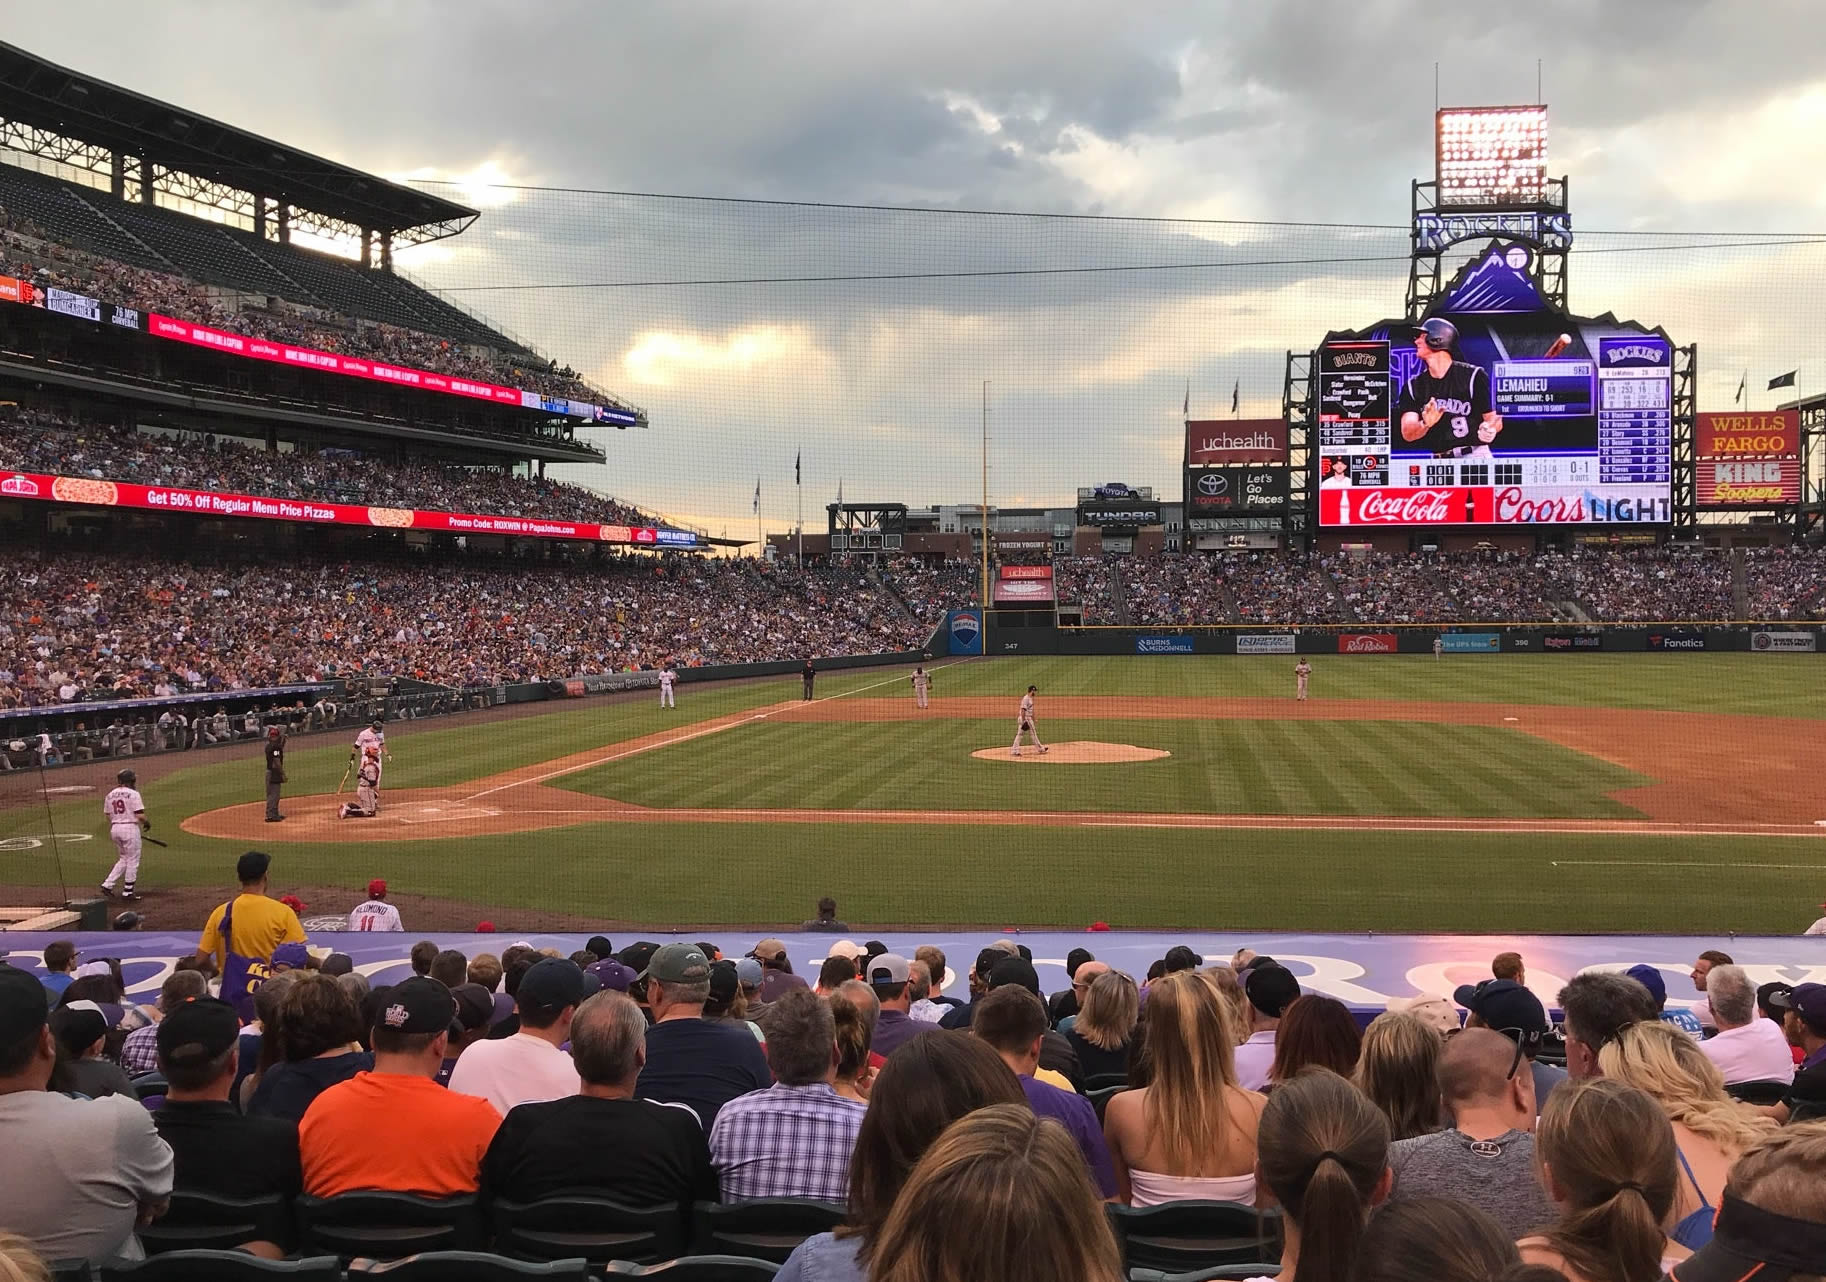 section 123, row 15 seat view  - coors field